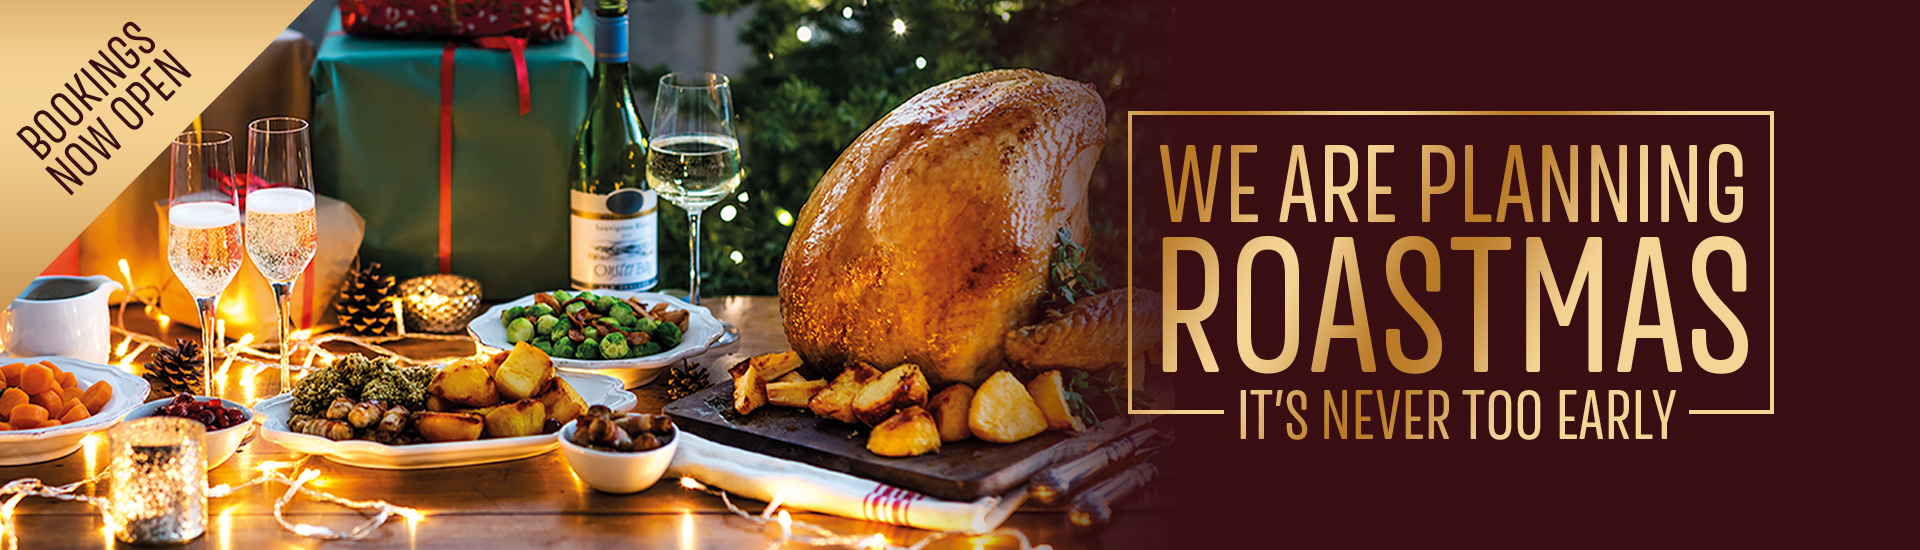 Christmas 2022 at your local Toby Carvery Edenthorpe | Home of the Roast